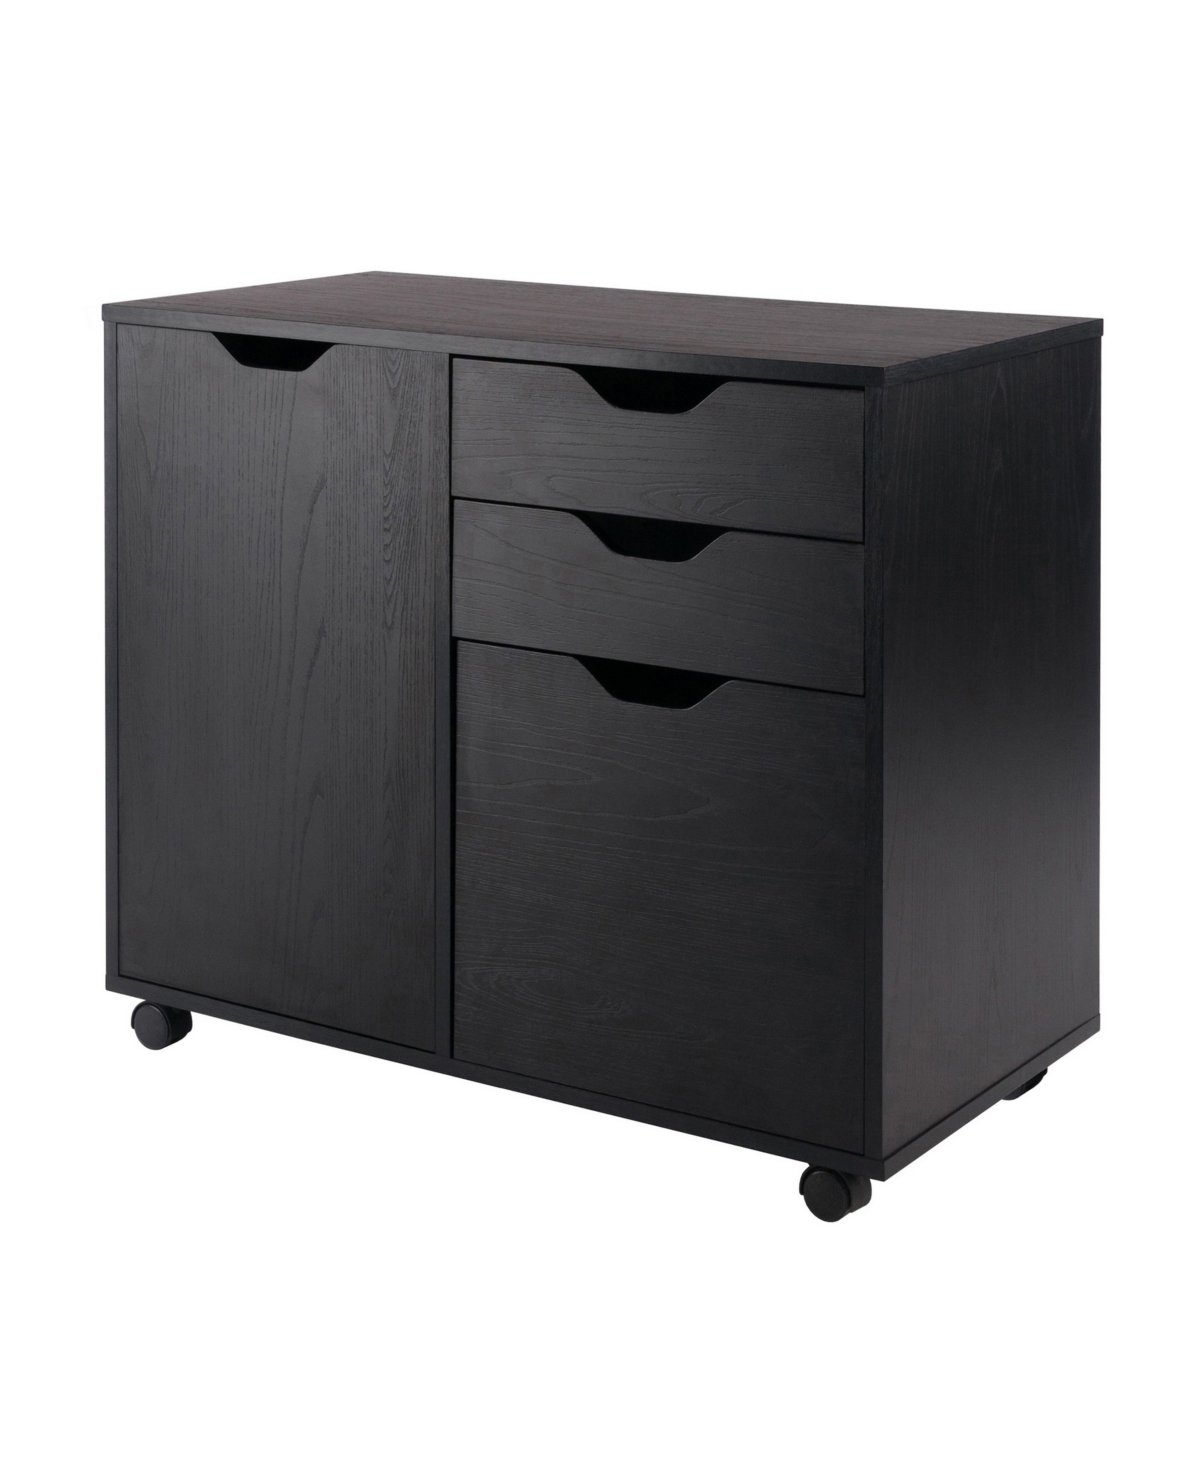 Winsome Halifax 26.3" Wood 2-drawer Wide Filing Cabinet Storage Cabinet In Black